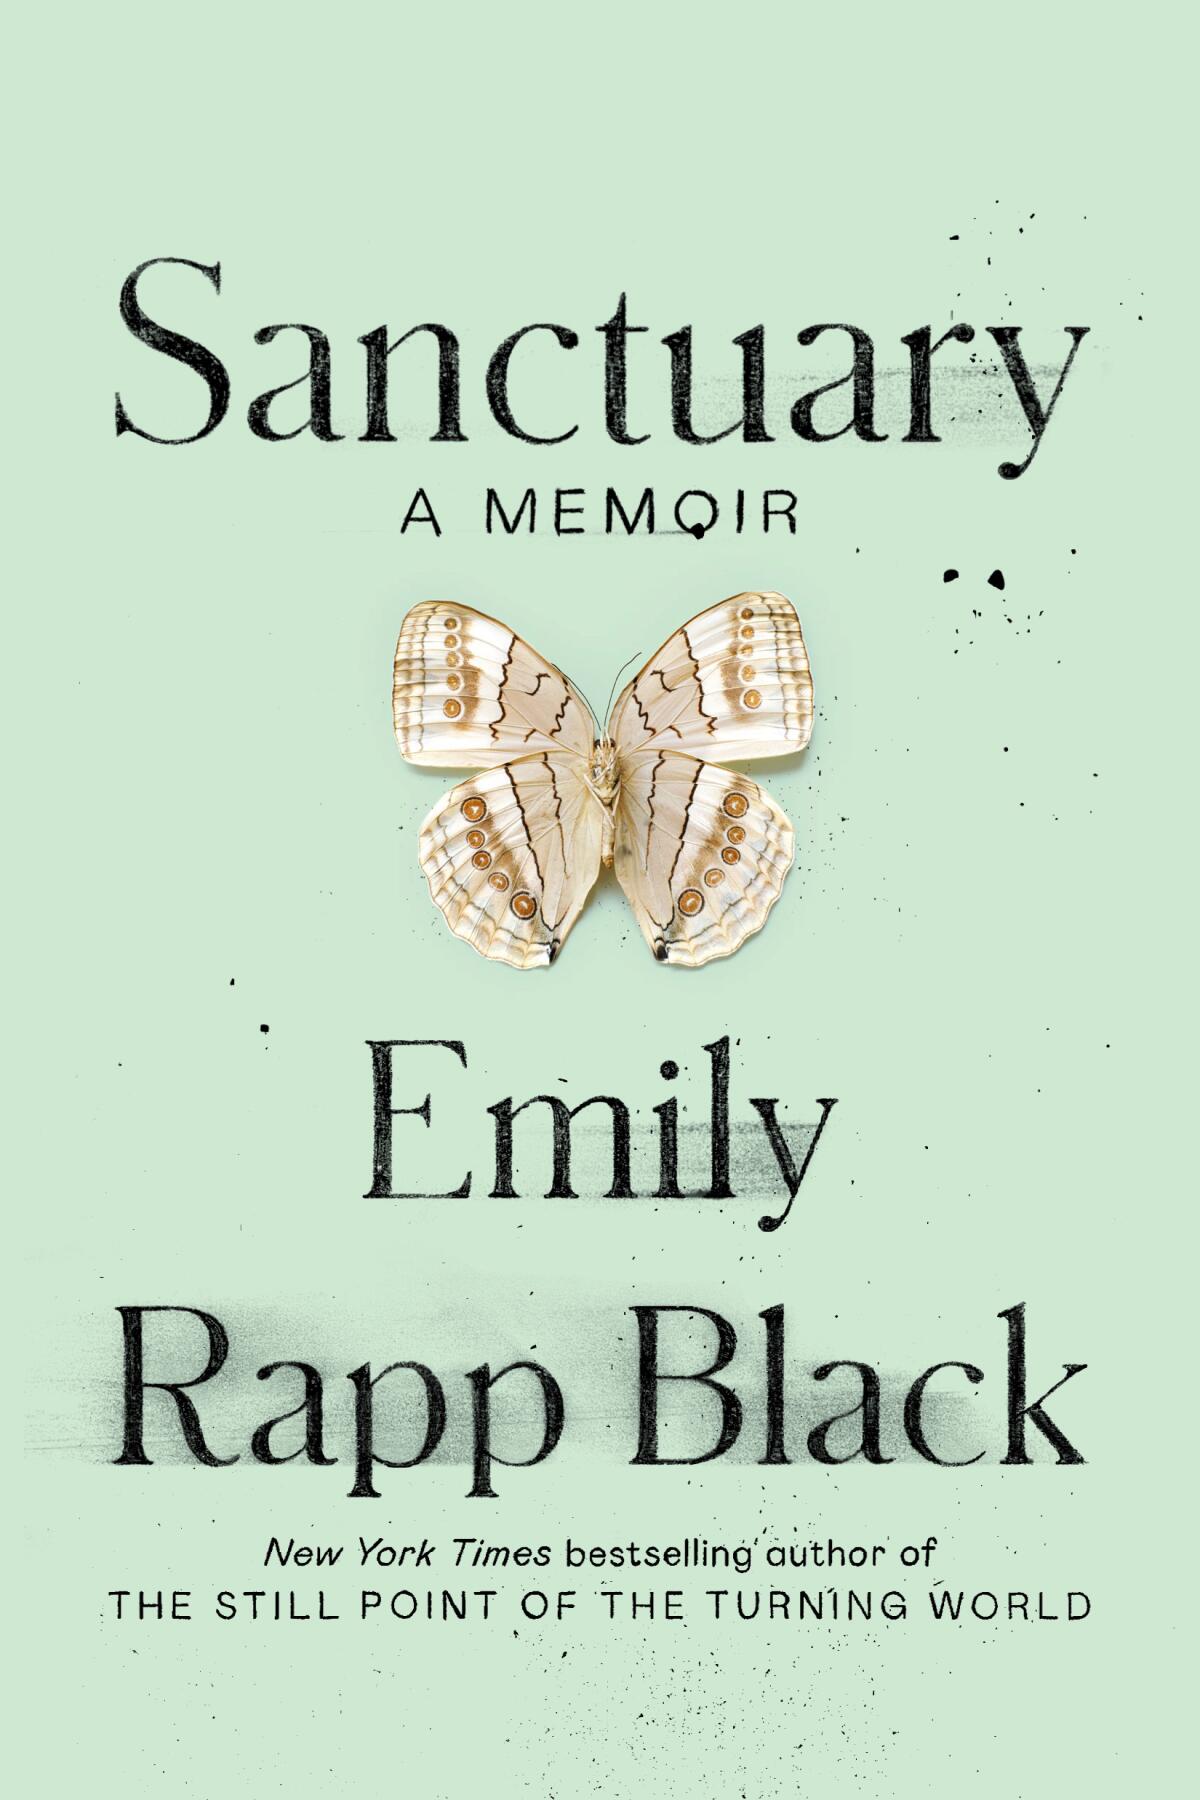 Book cover with black text and a green background and an illustration of a moth for "Sanctuary: A Memoir."